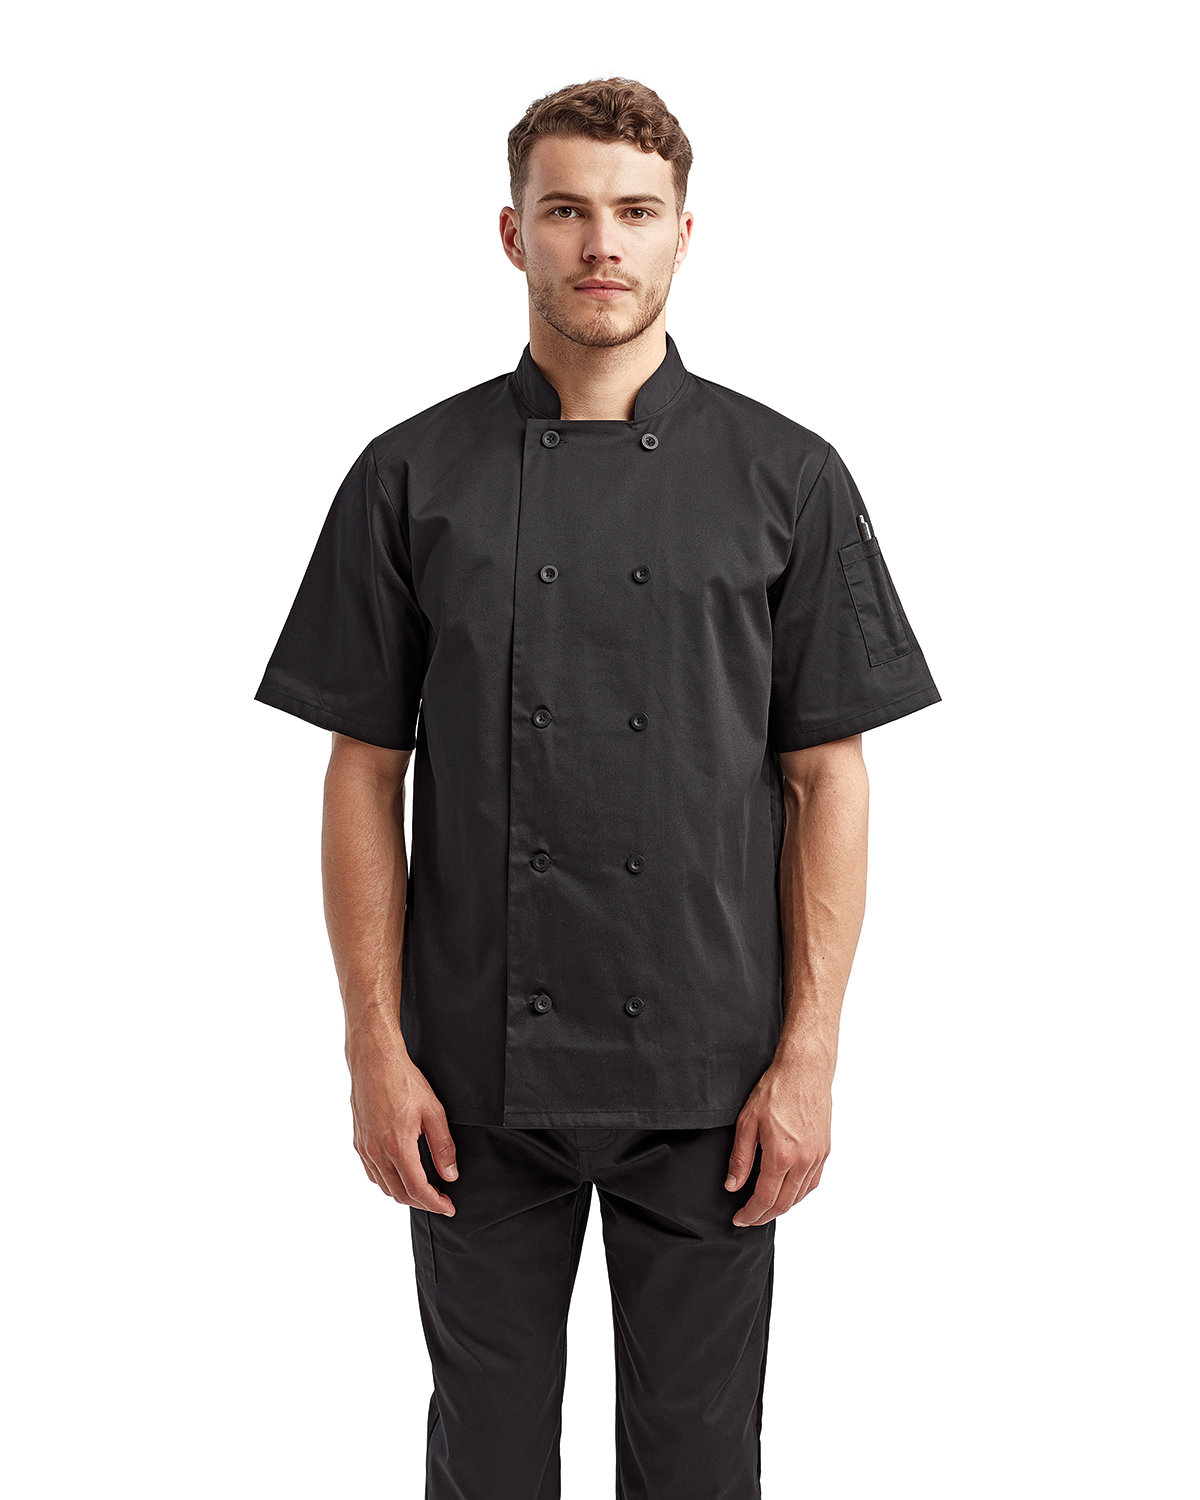 Artisan Collection by Reprime Unisex Short-Sleeve Sustainable Chef's Jacket BLACK 